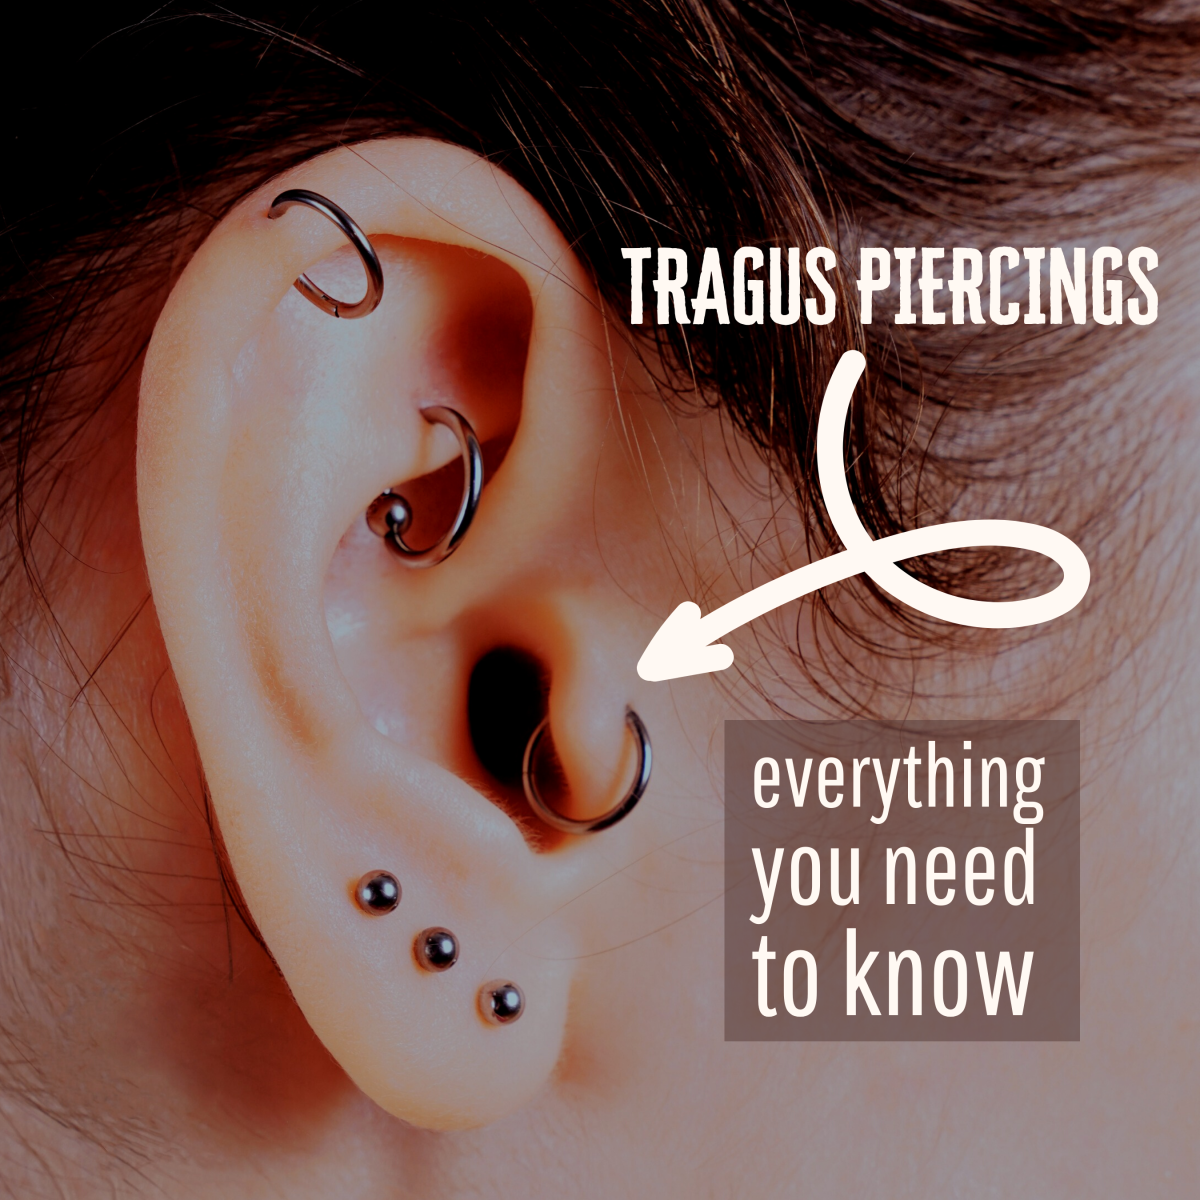 Tragus Piercing Tips: Aftercare, Infection, Jewelry, Etc.